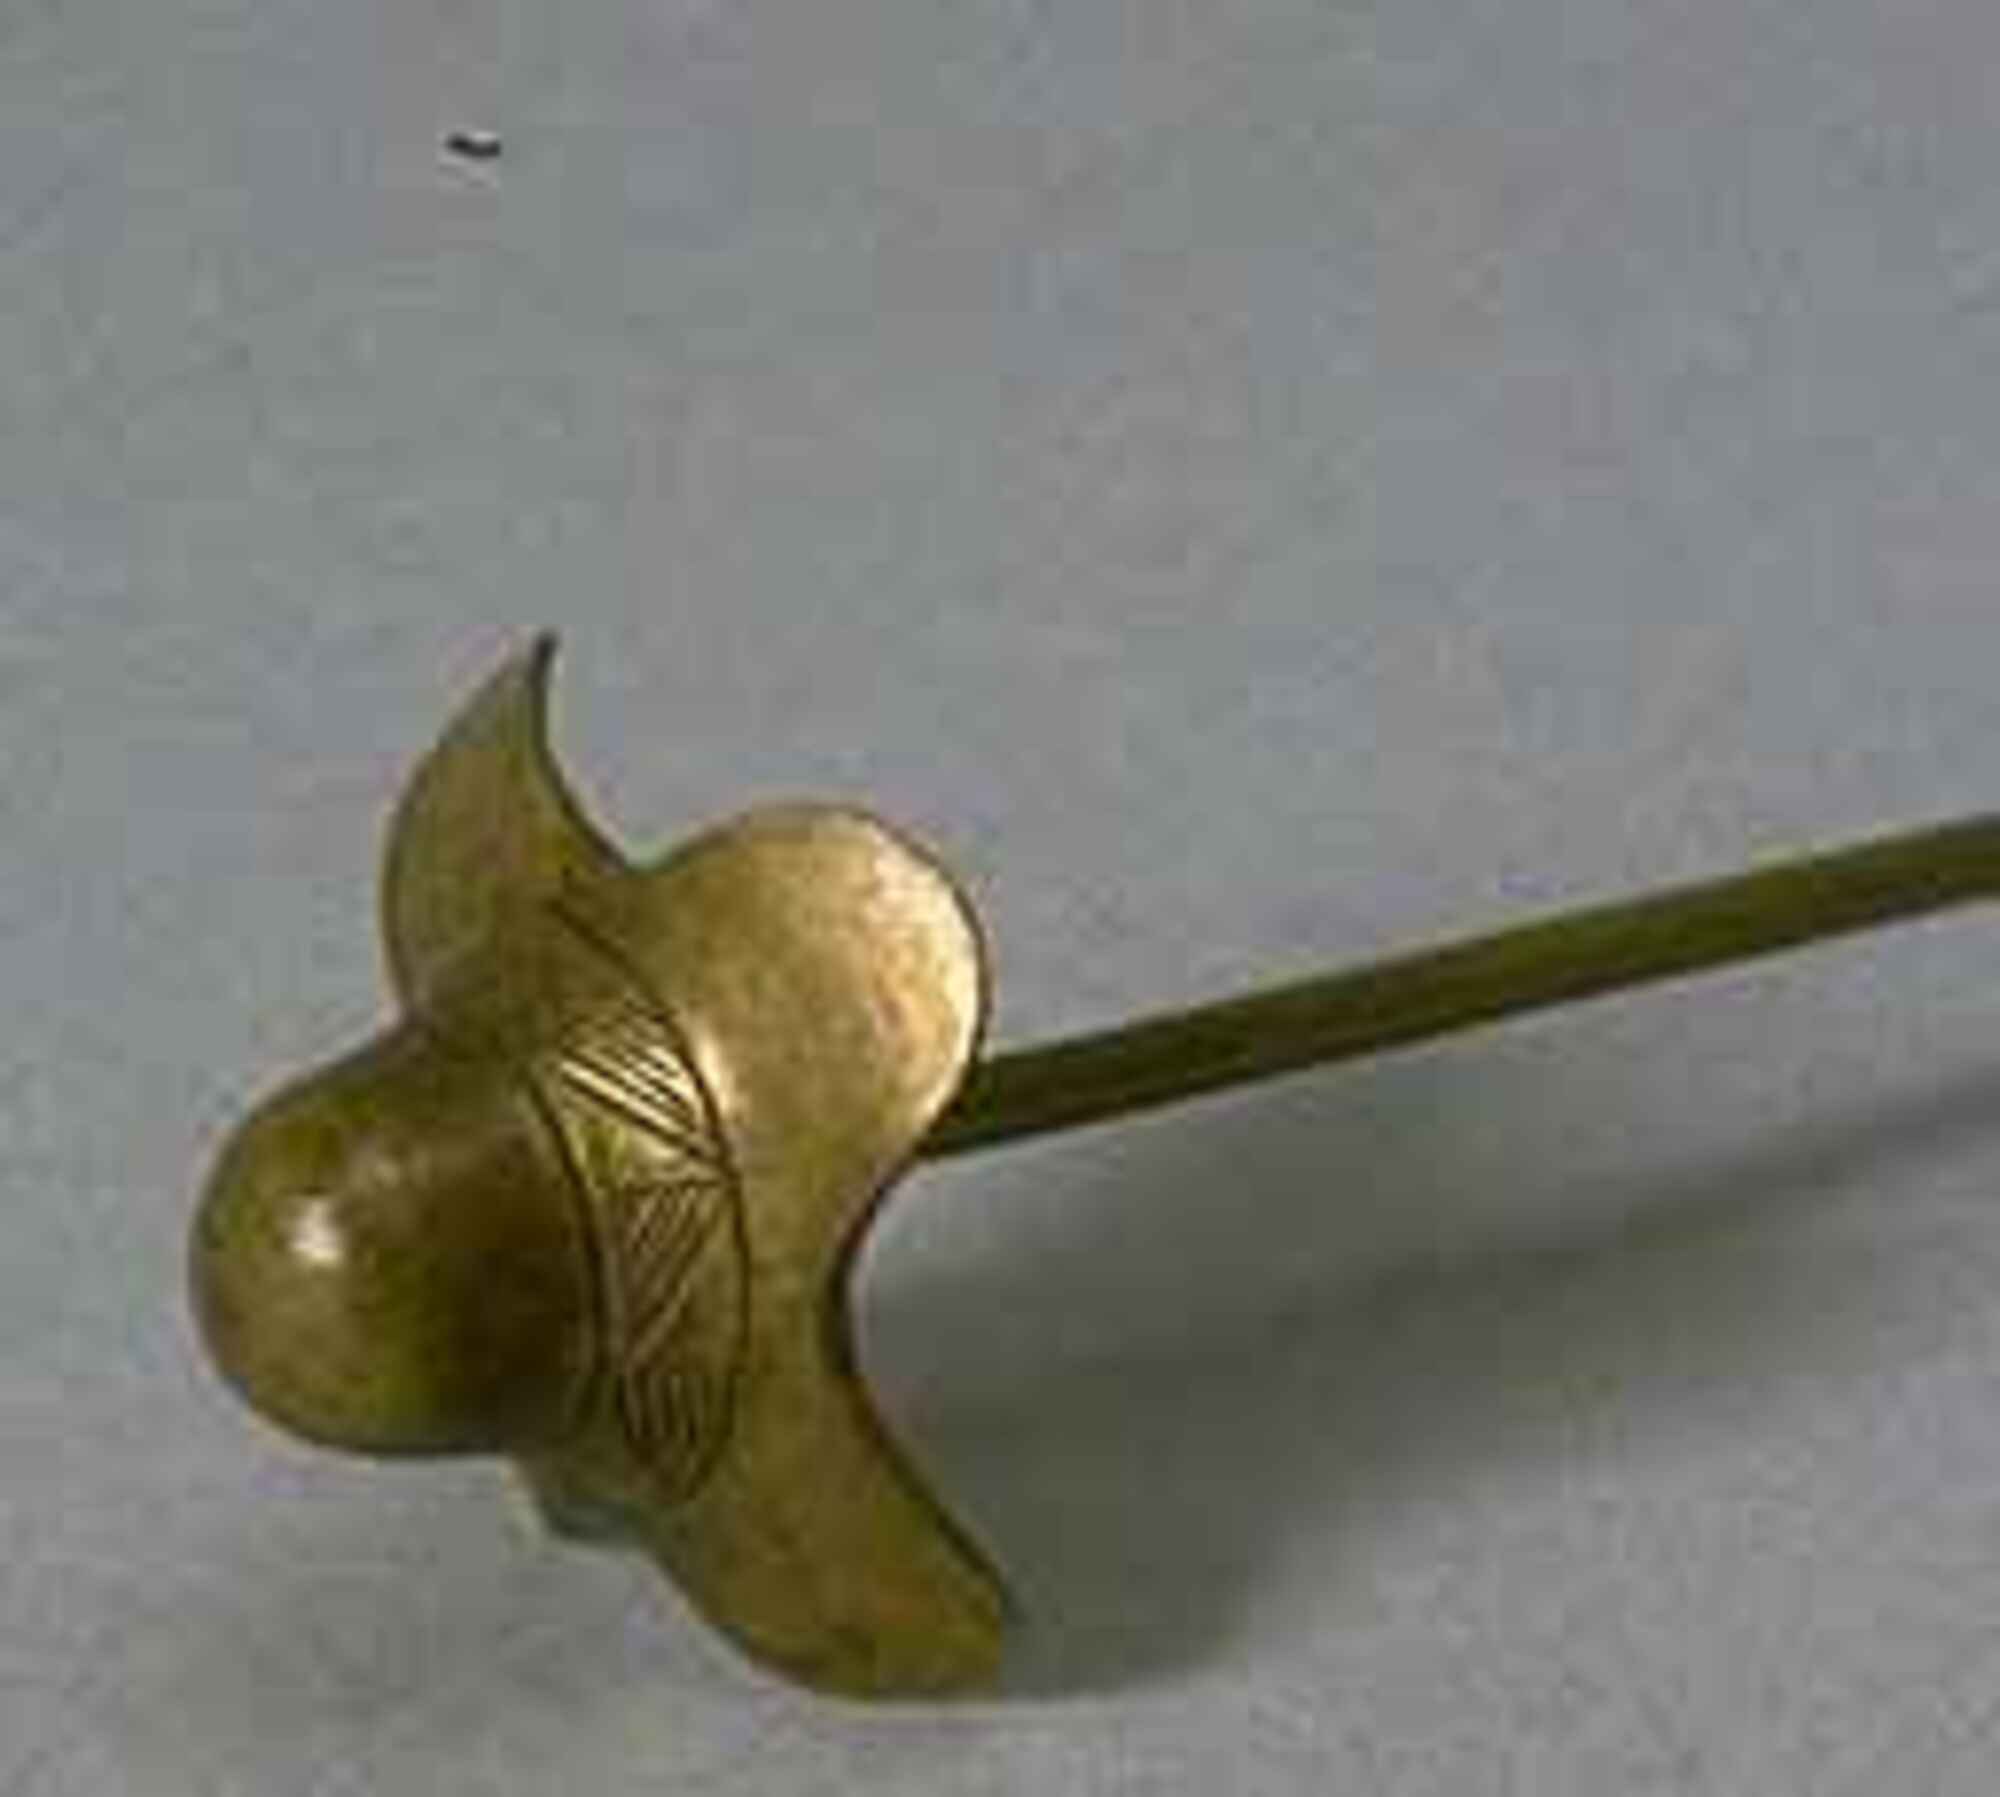 Pin with designed bulb-like pinhead. Head of the pin is round with its base flowering into four round petal-like shapes. Wrapping around the middle portion of the pinhead is a geometric pattern. 